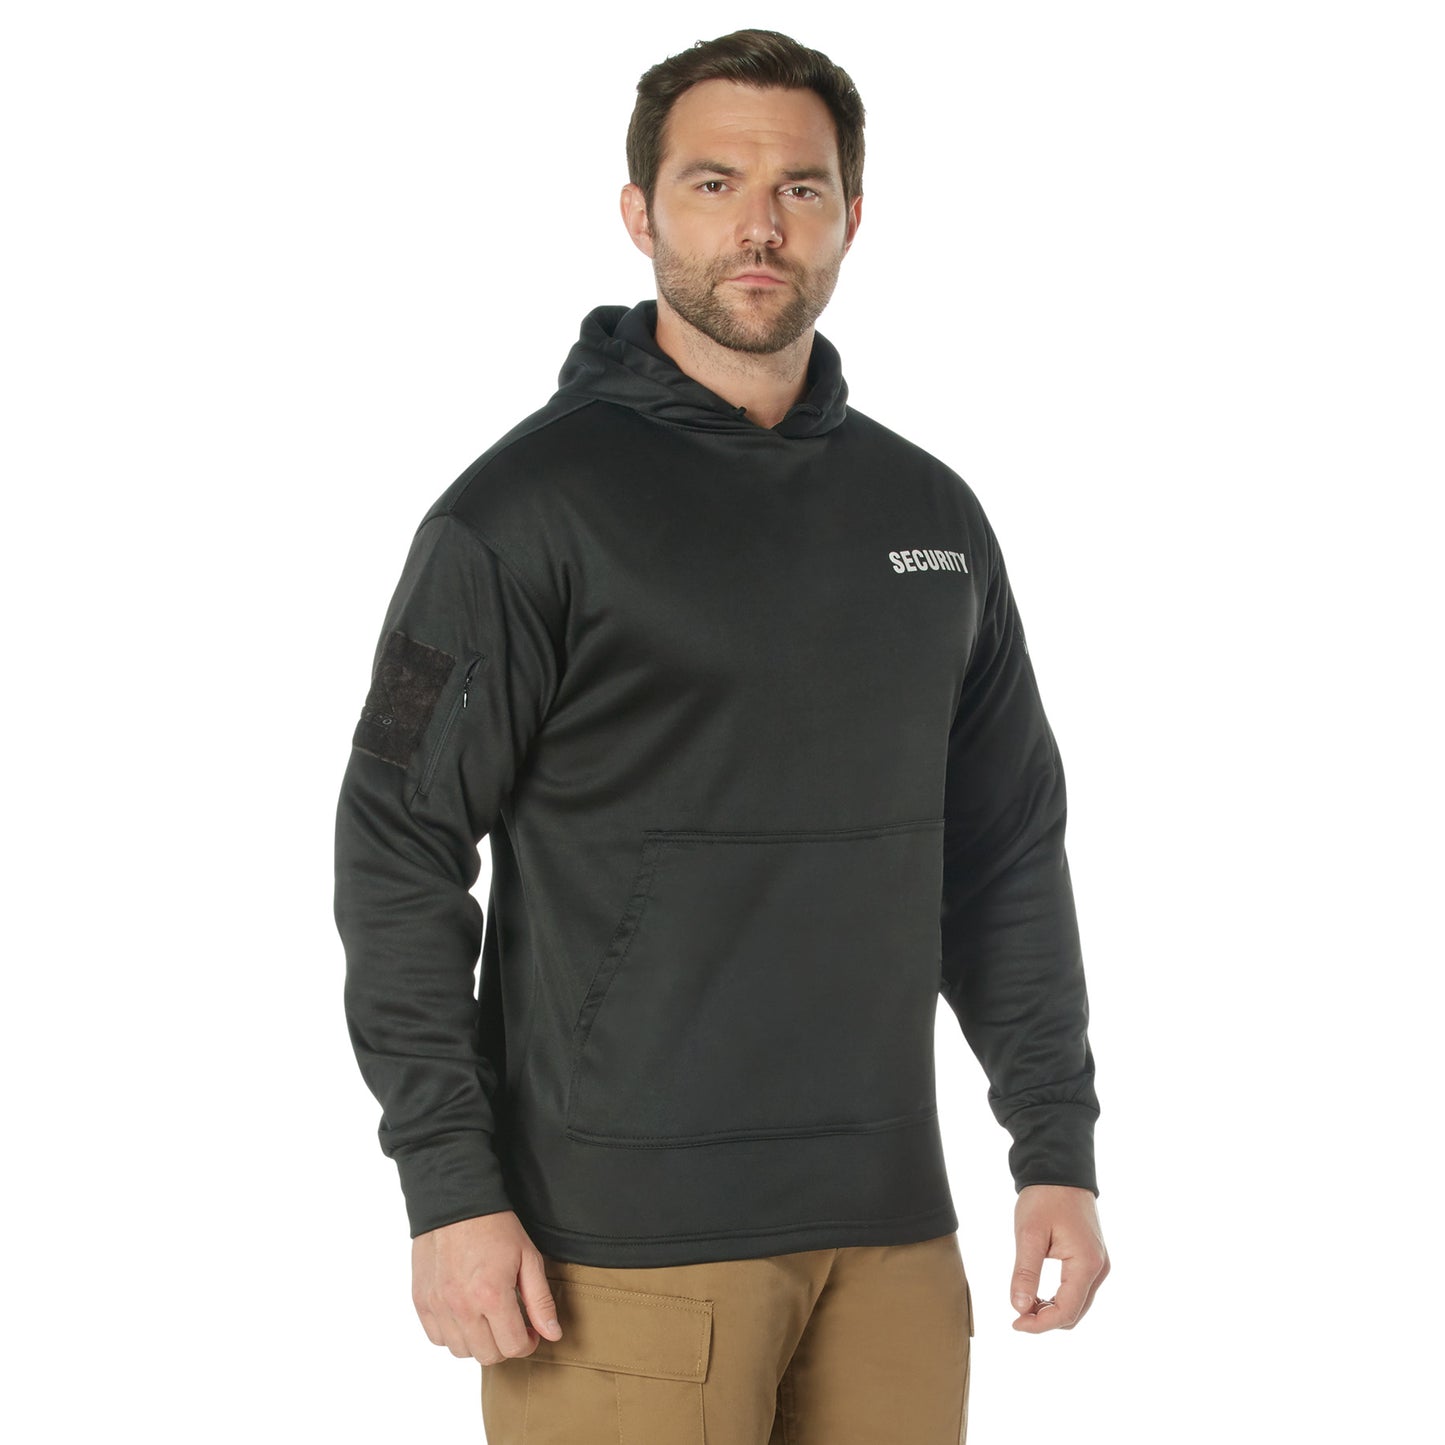 Rothco Security Concealed Carry Hoodie   Black